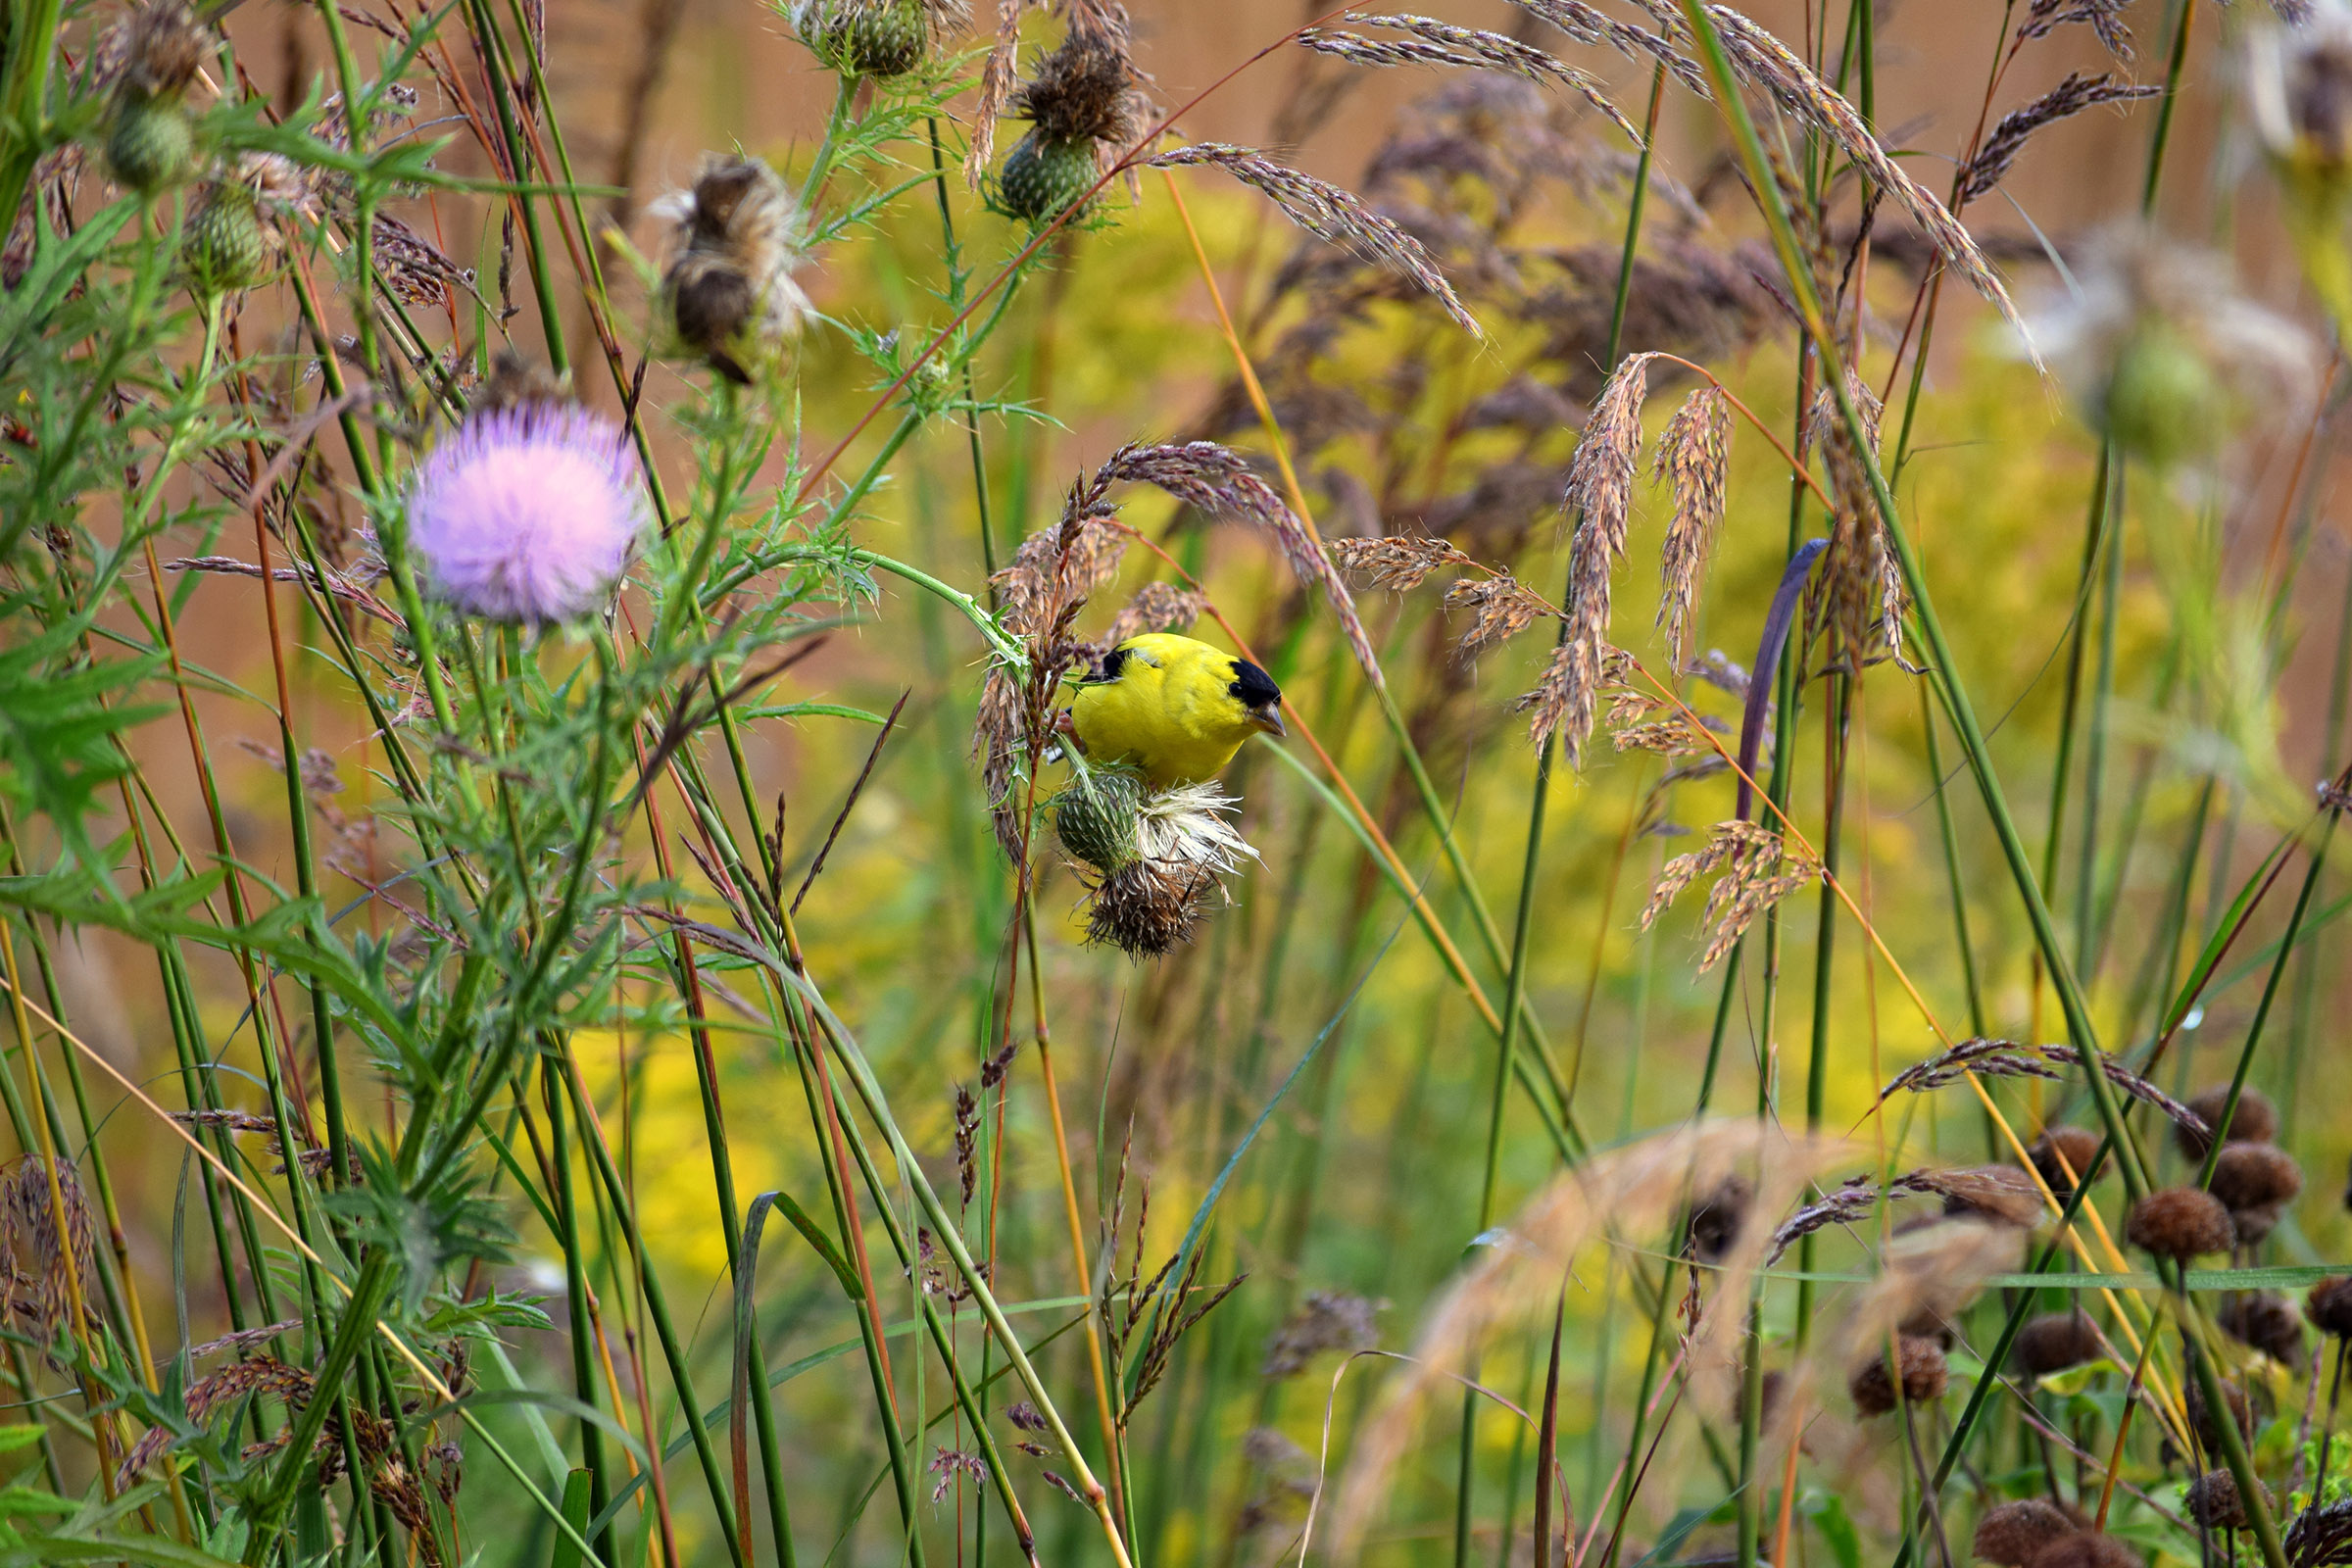 A brightly colored yellow and black goldfinch eats seeds from a pale pink thistle flower head.